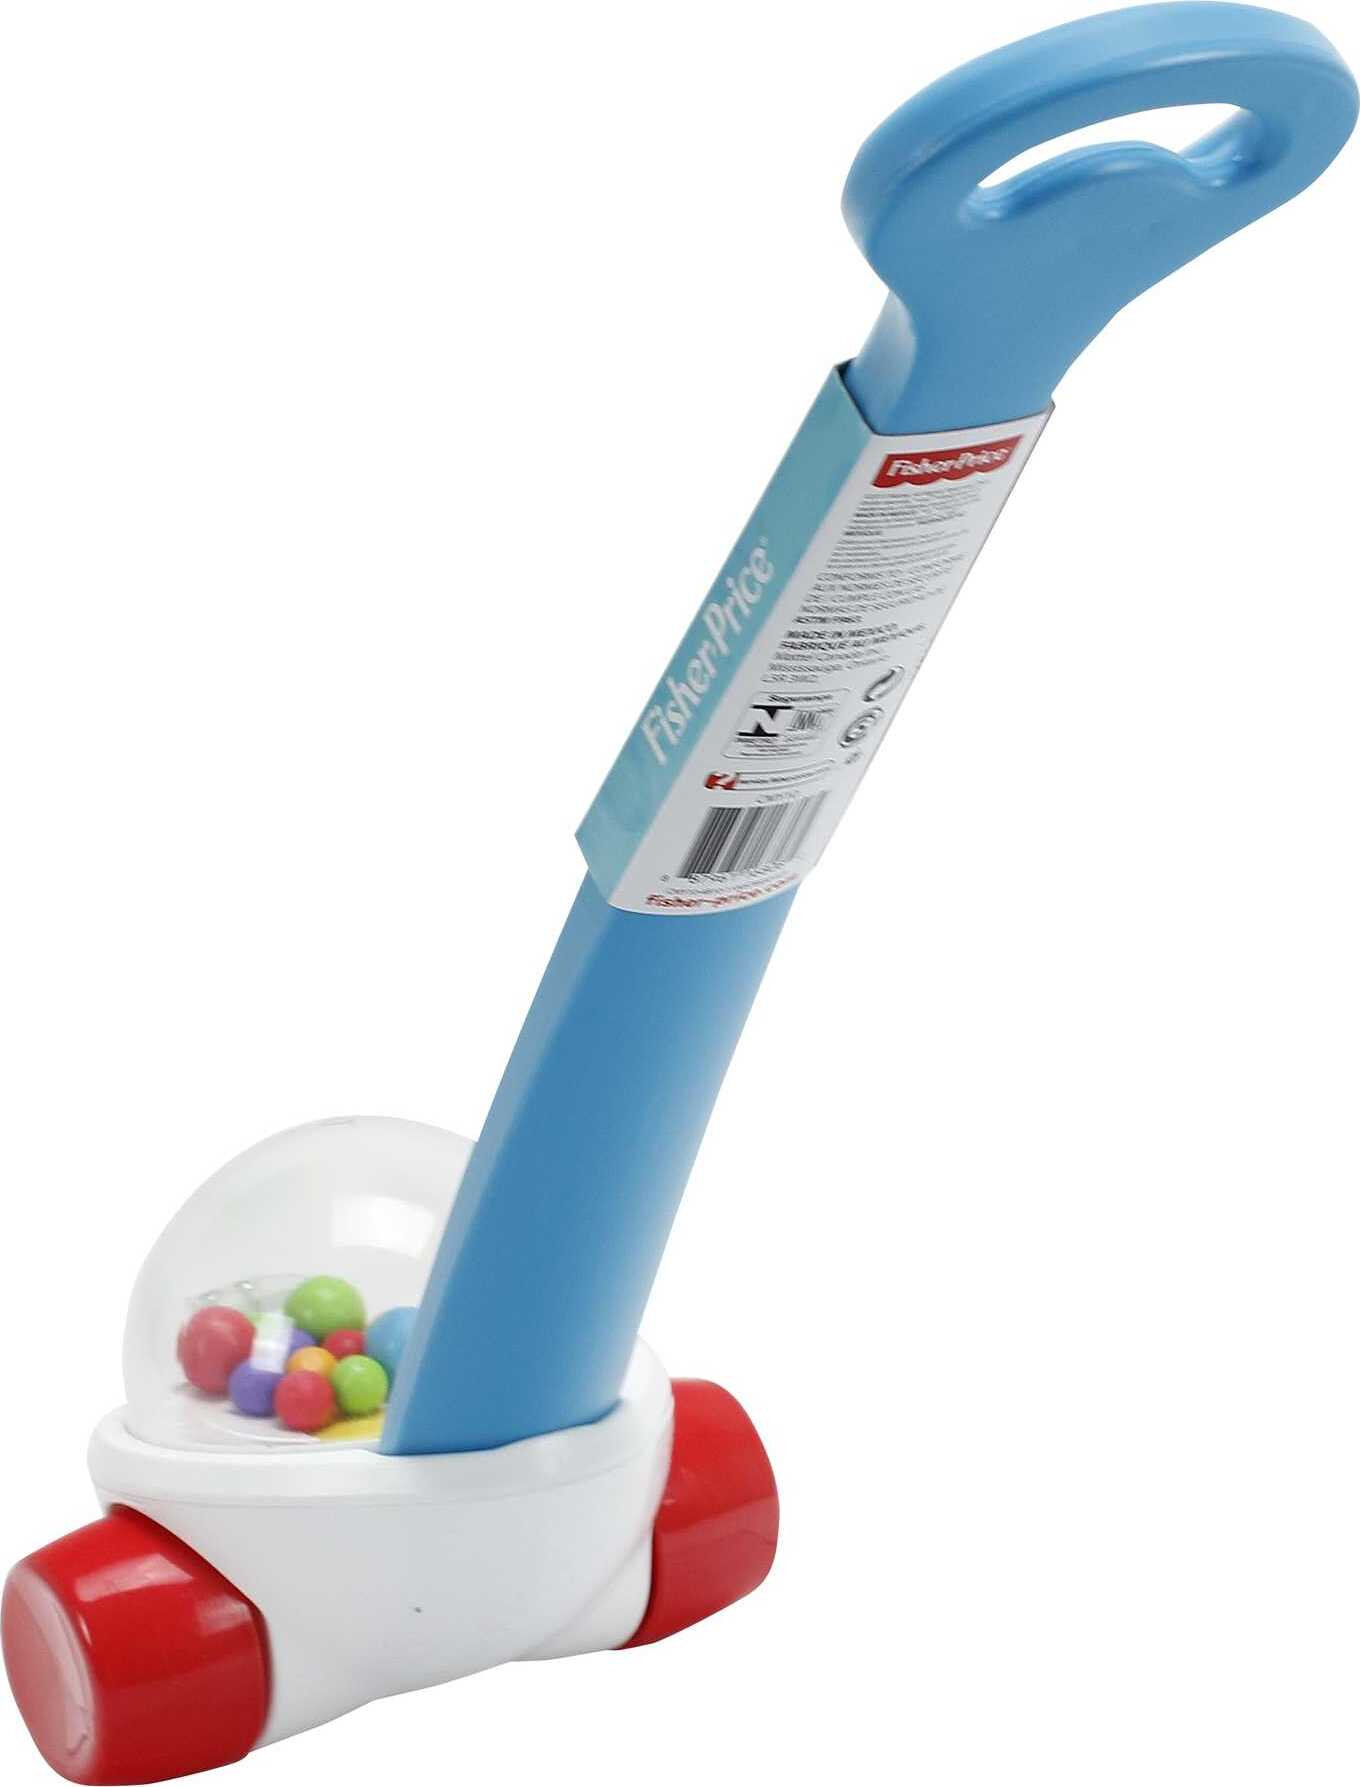 Fisher-Price Corn Popper Baby and Toddler Toy, Blue, 1 Piece, Push Toy for 1 Year Old and Up - image 5 of 6